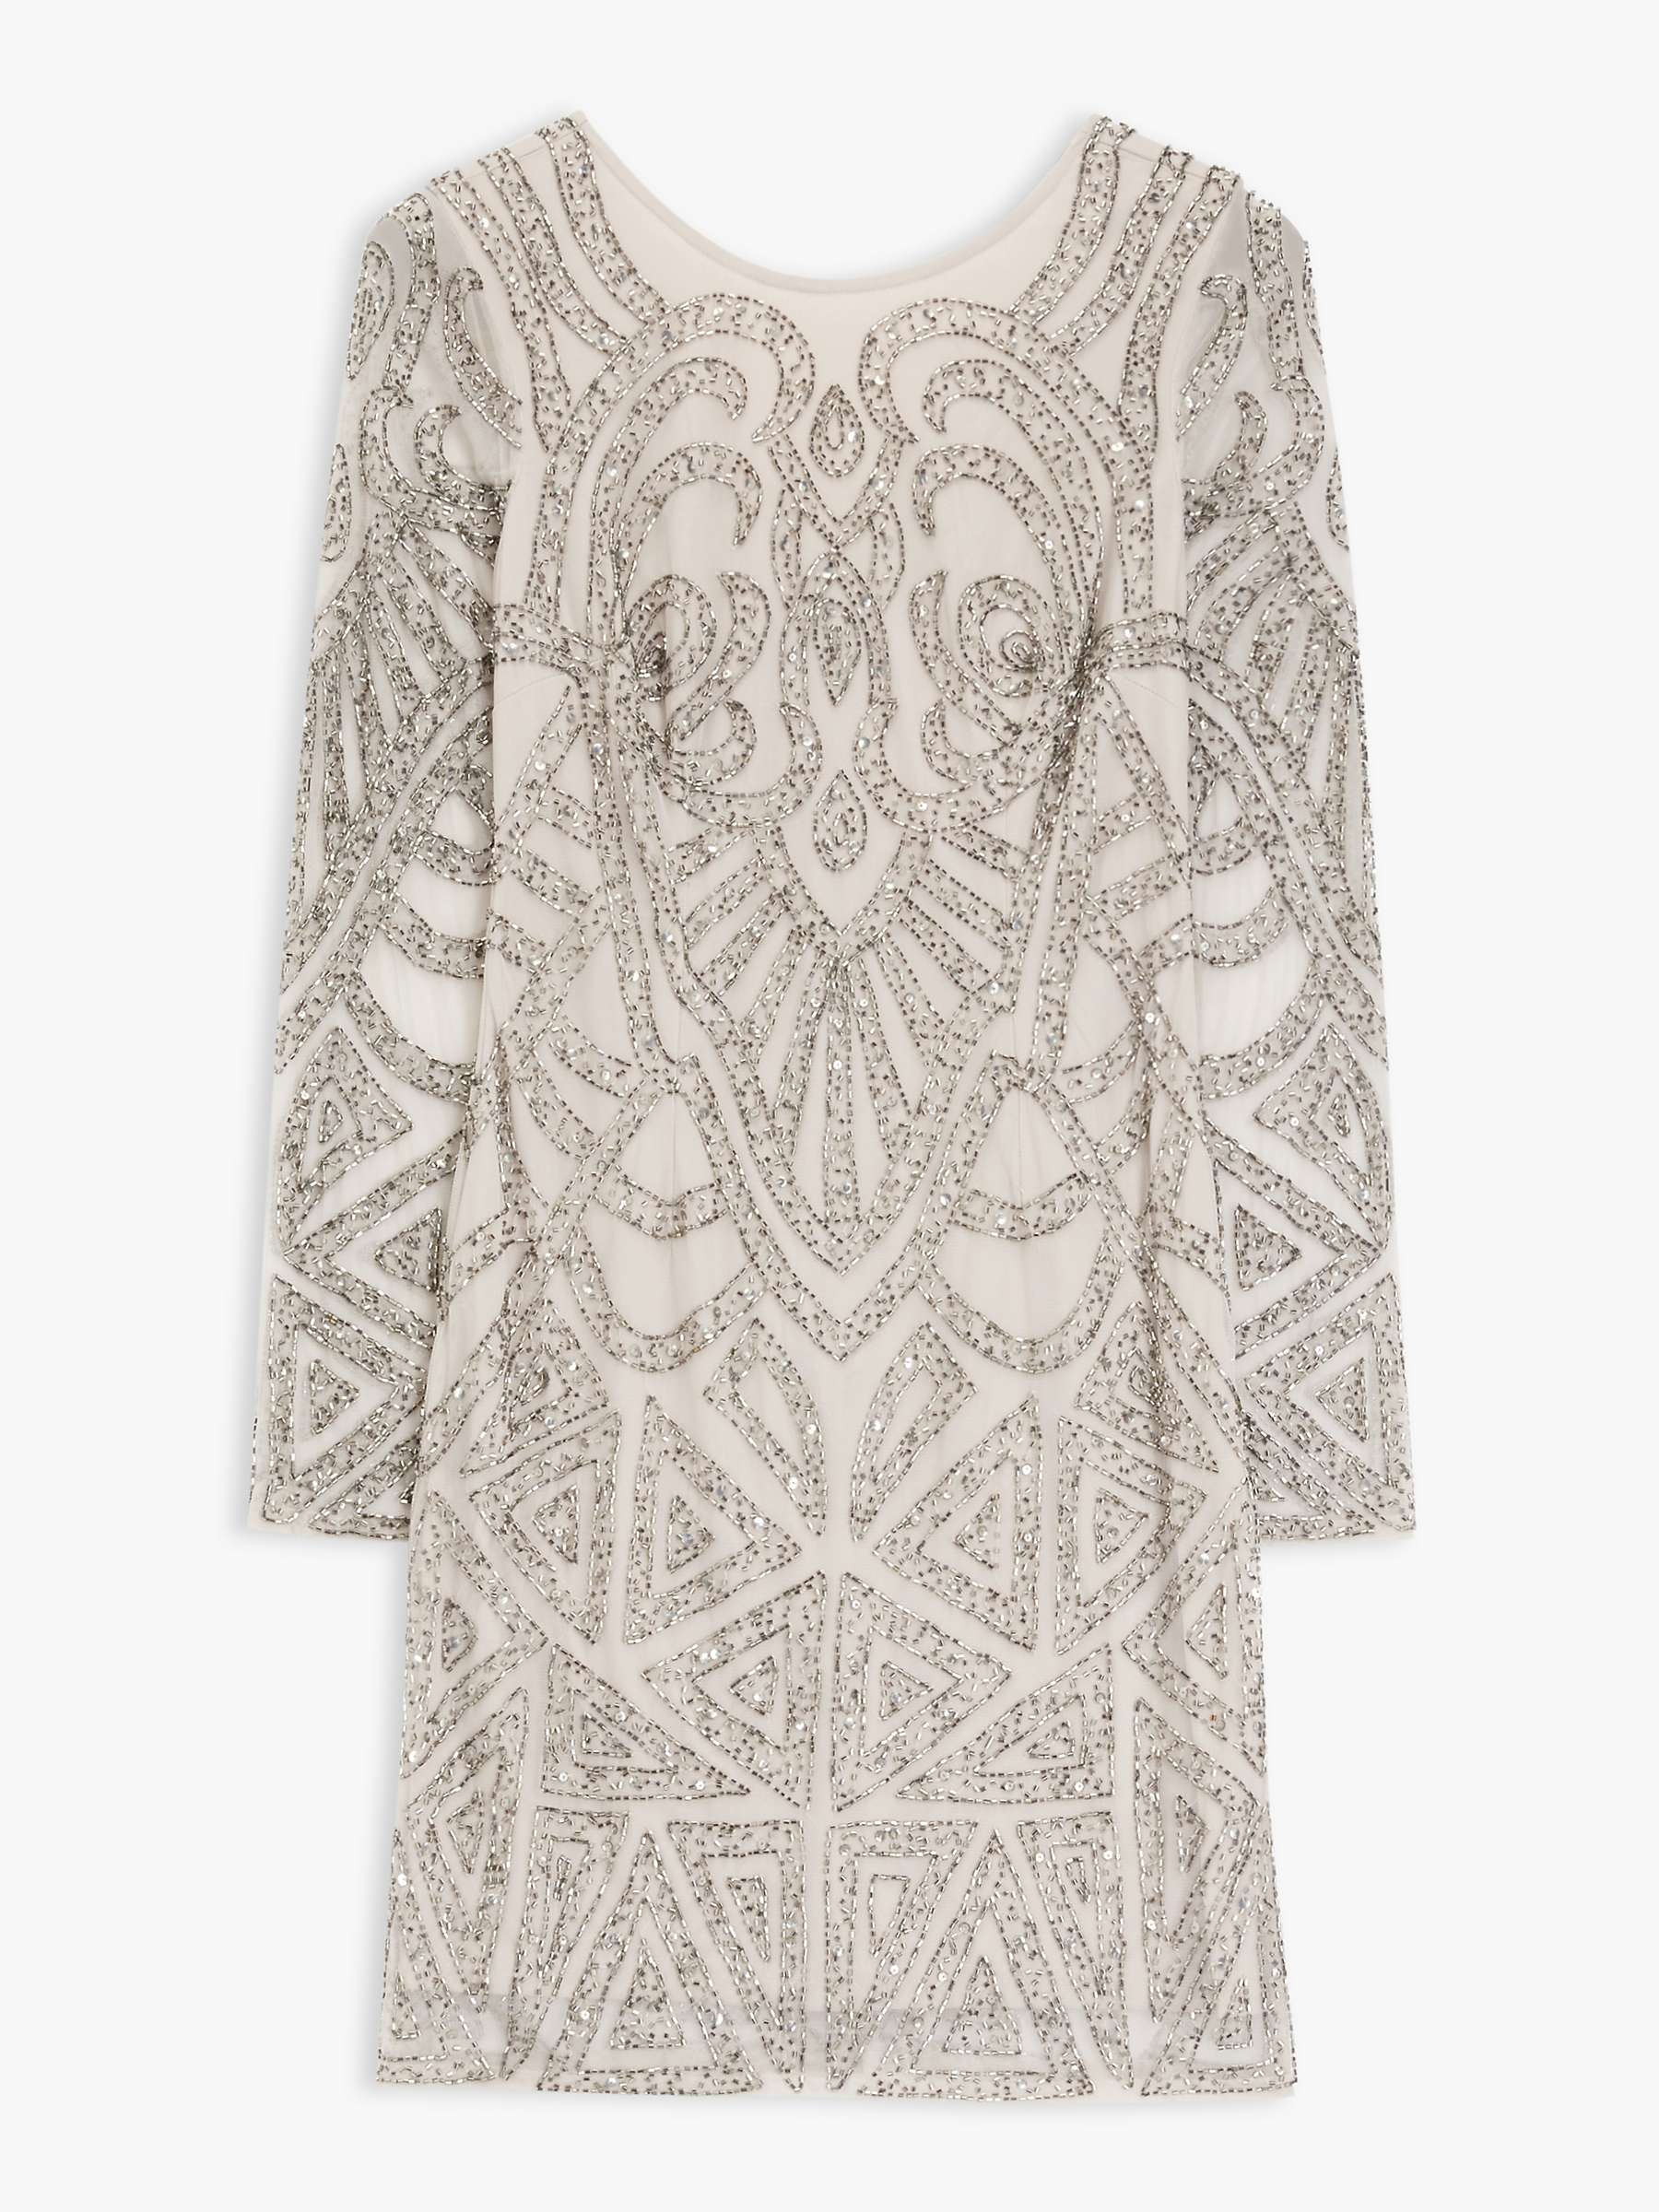 Buy Lace & Beads Brooklyn Embellished Mini Dress Online at johnlewis.com